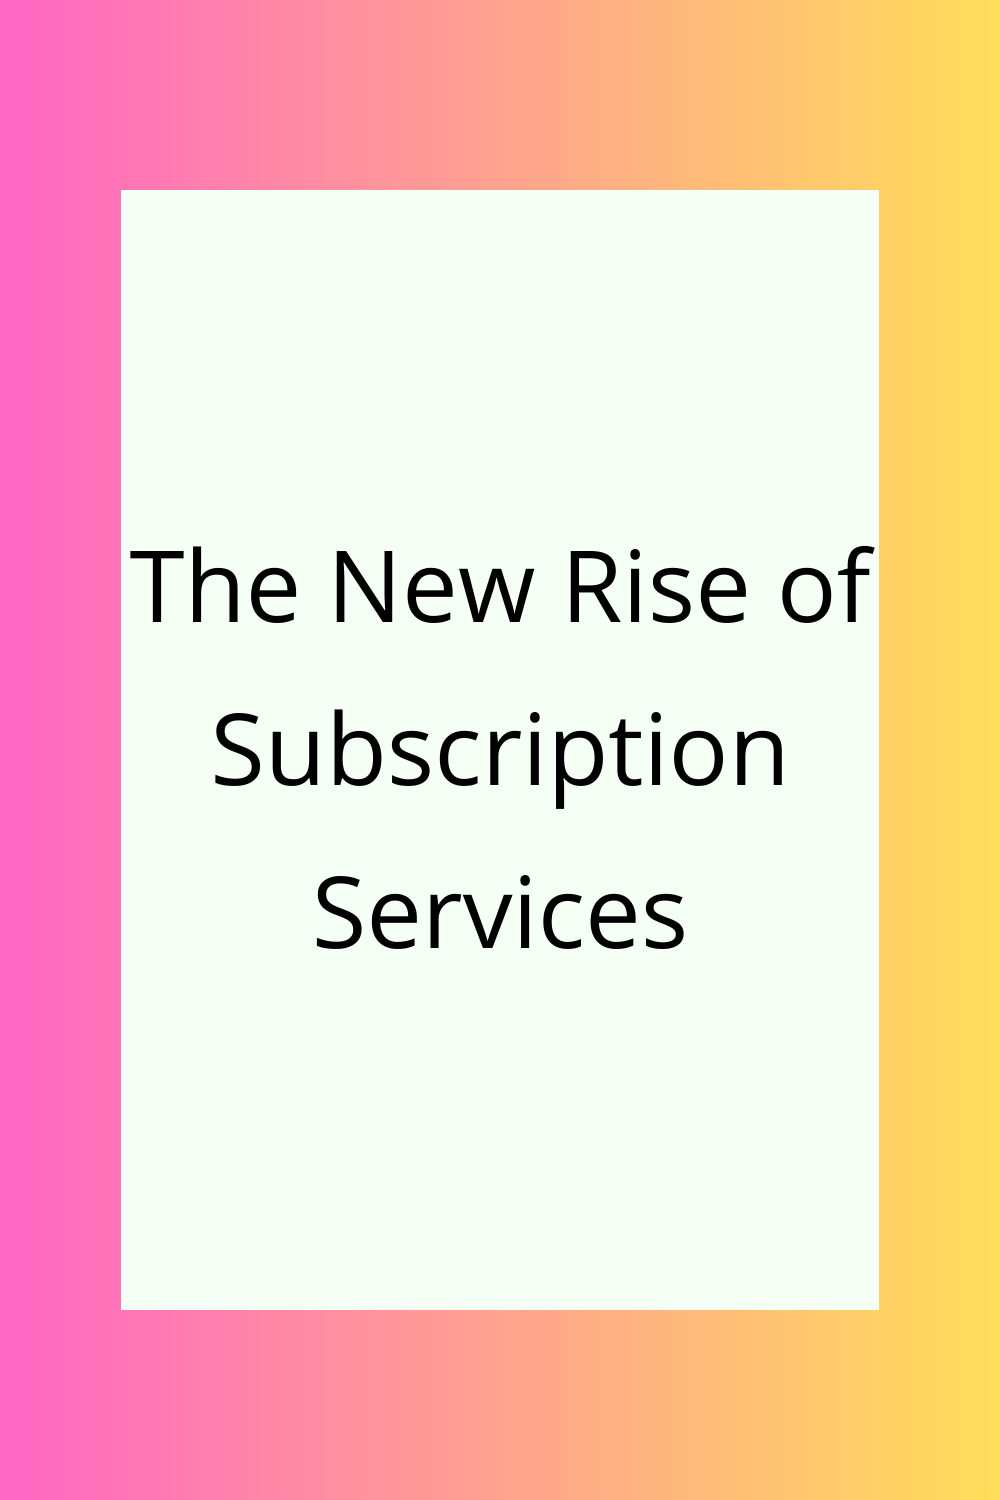 The New Rise of Subscription Services